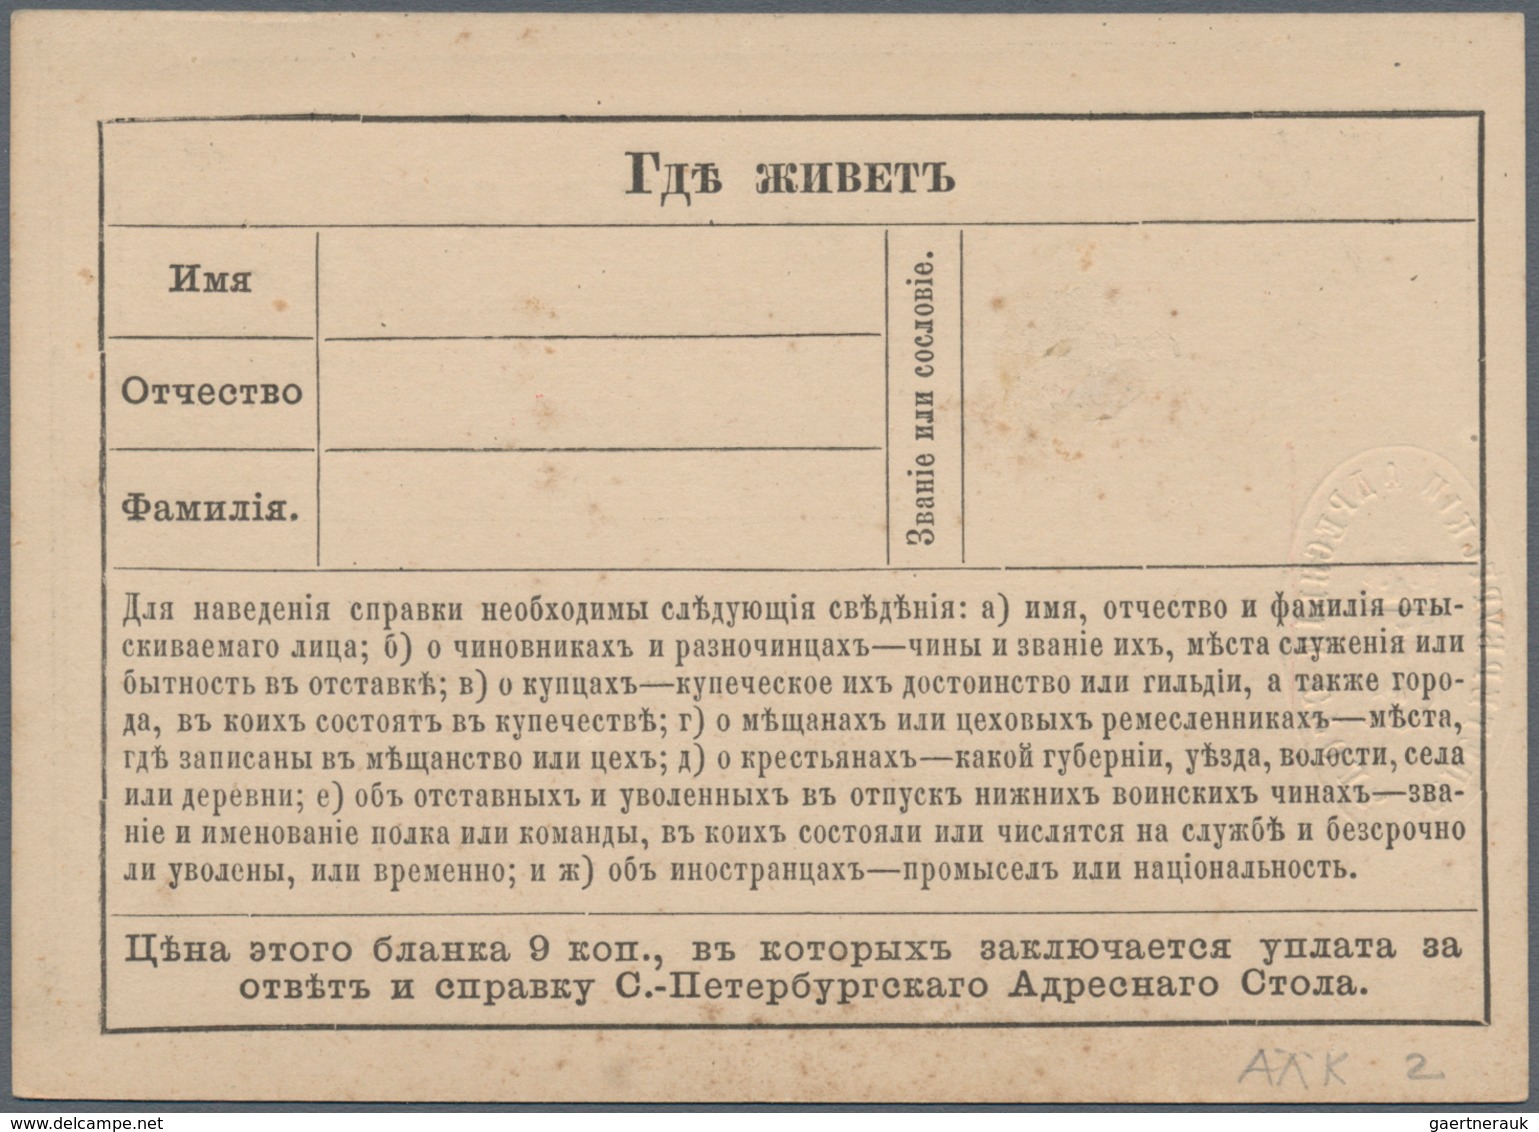 Russland - Ganzsachen: 1881/91, 4 unused information cards for the adress-office in St. Petersburg a